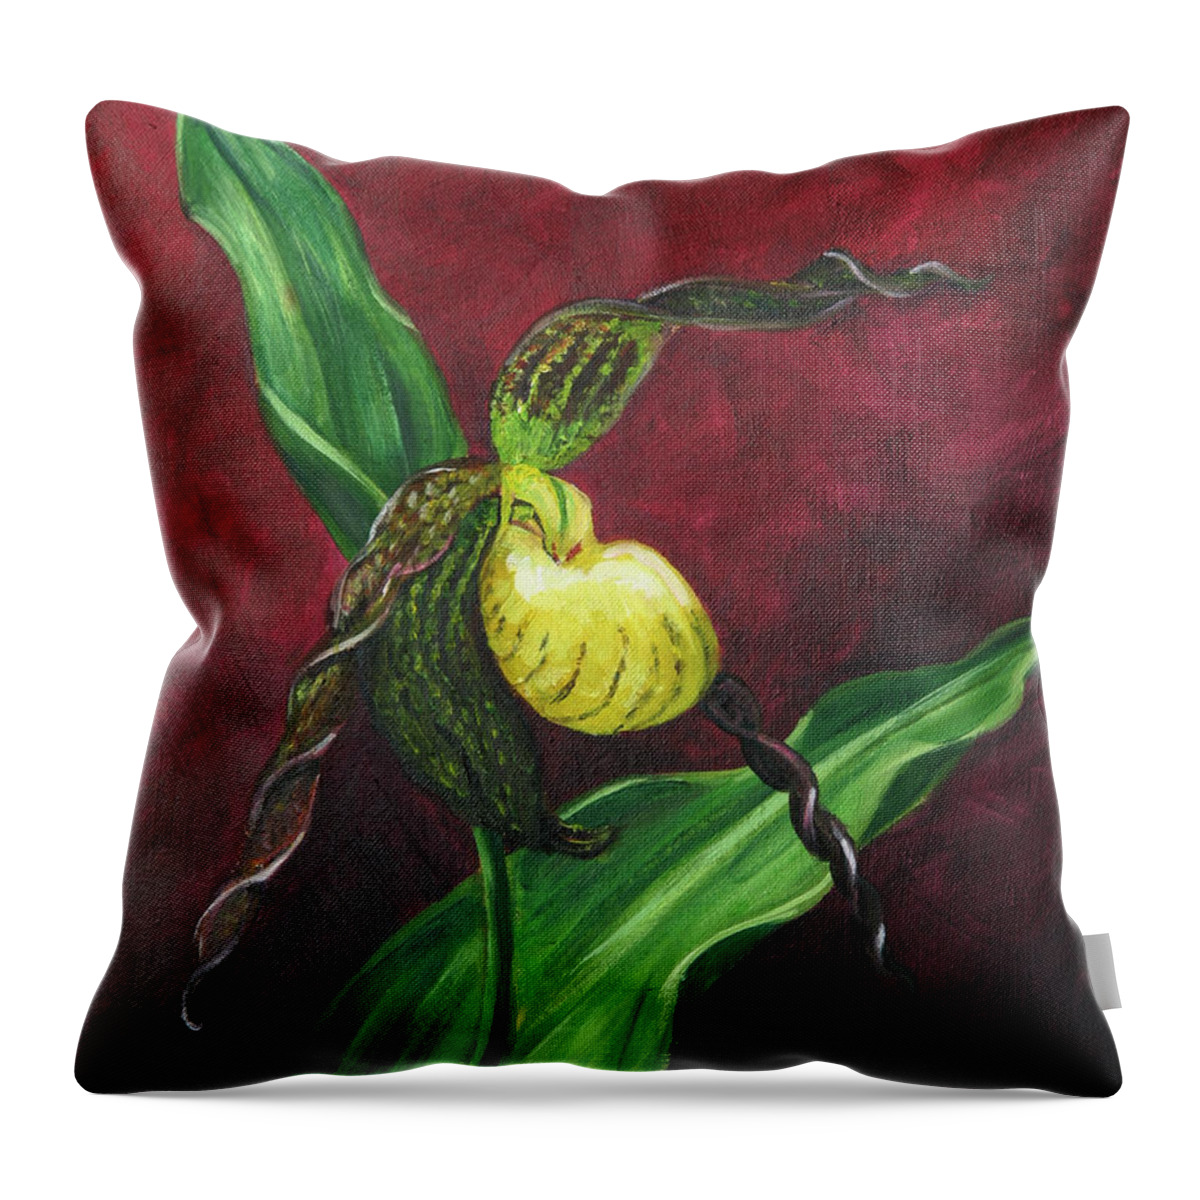 Dwayne Glapion Throw Pillow featuring the painting Lady Slipper by Dwayne Glapion